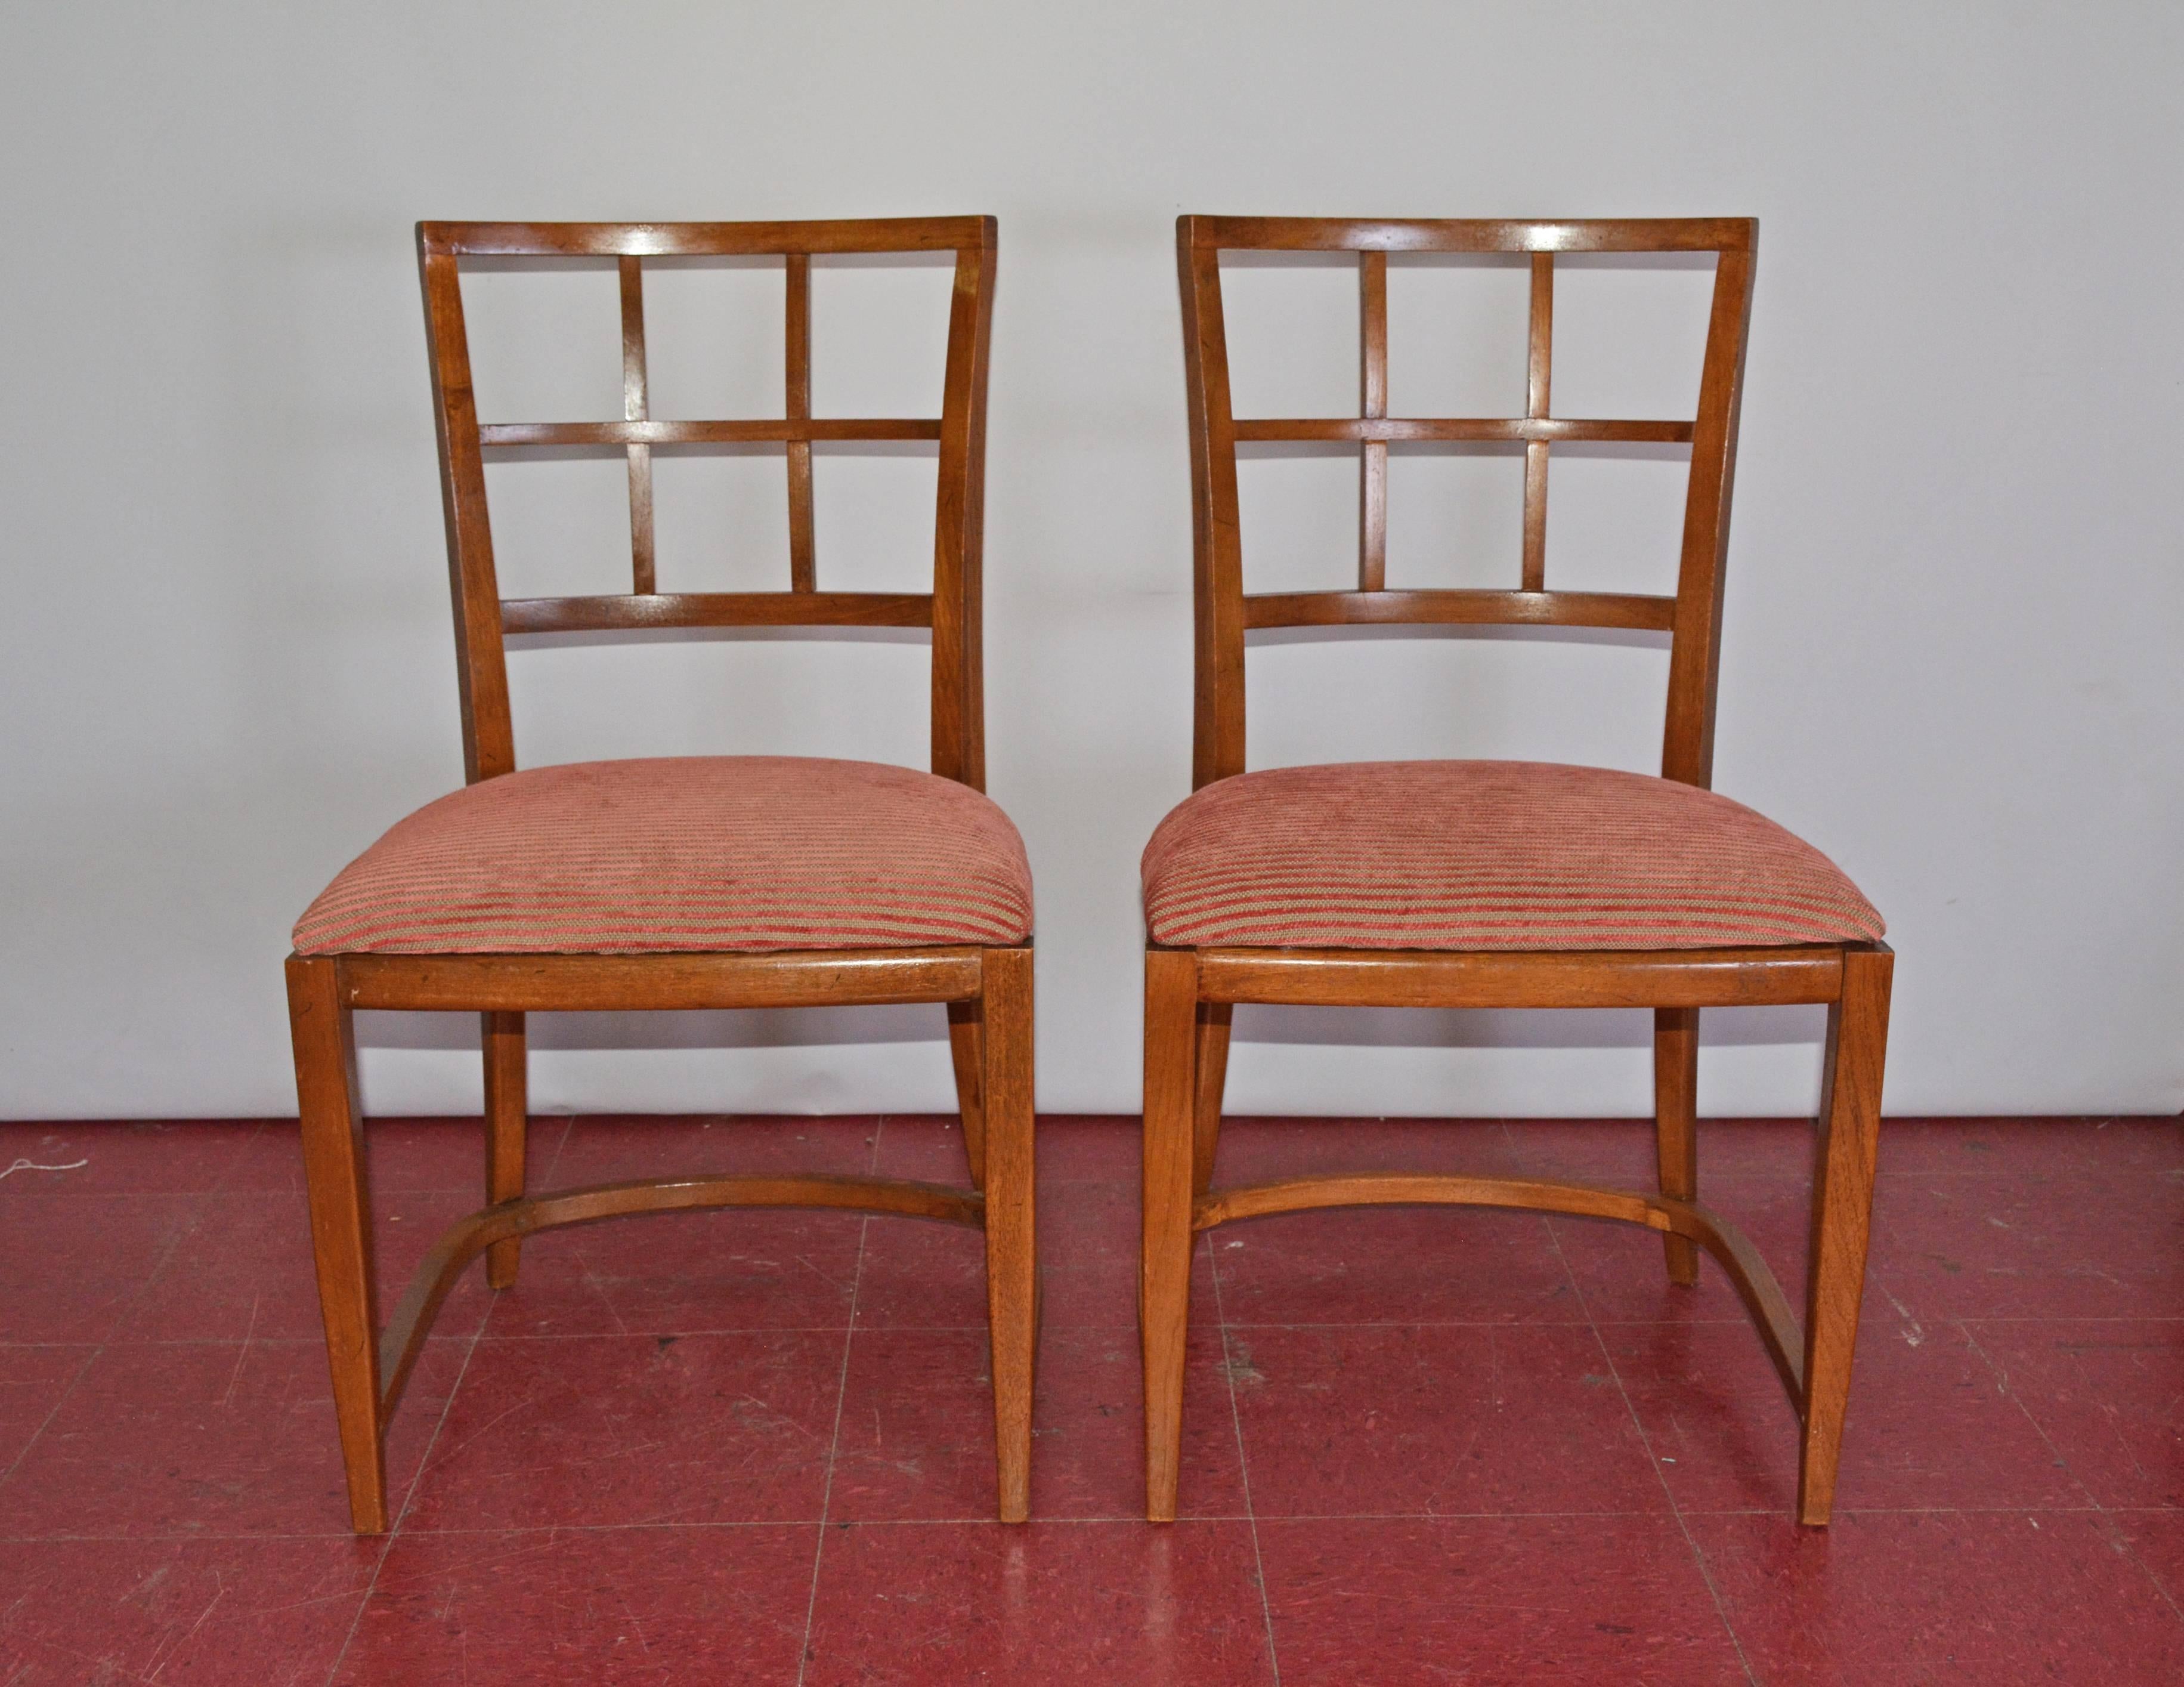 The pair of Art Deco dining chairs have rounded leg framing and backs. The seats are newly upholstered in ribbed red and tan striping. Great as office chairs, desk chairs or side chairs. Two additional matching arm chairs available.